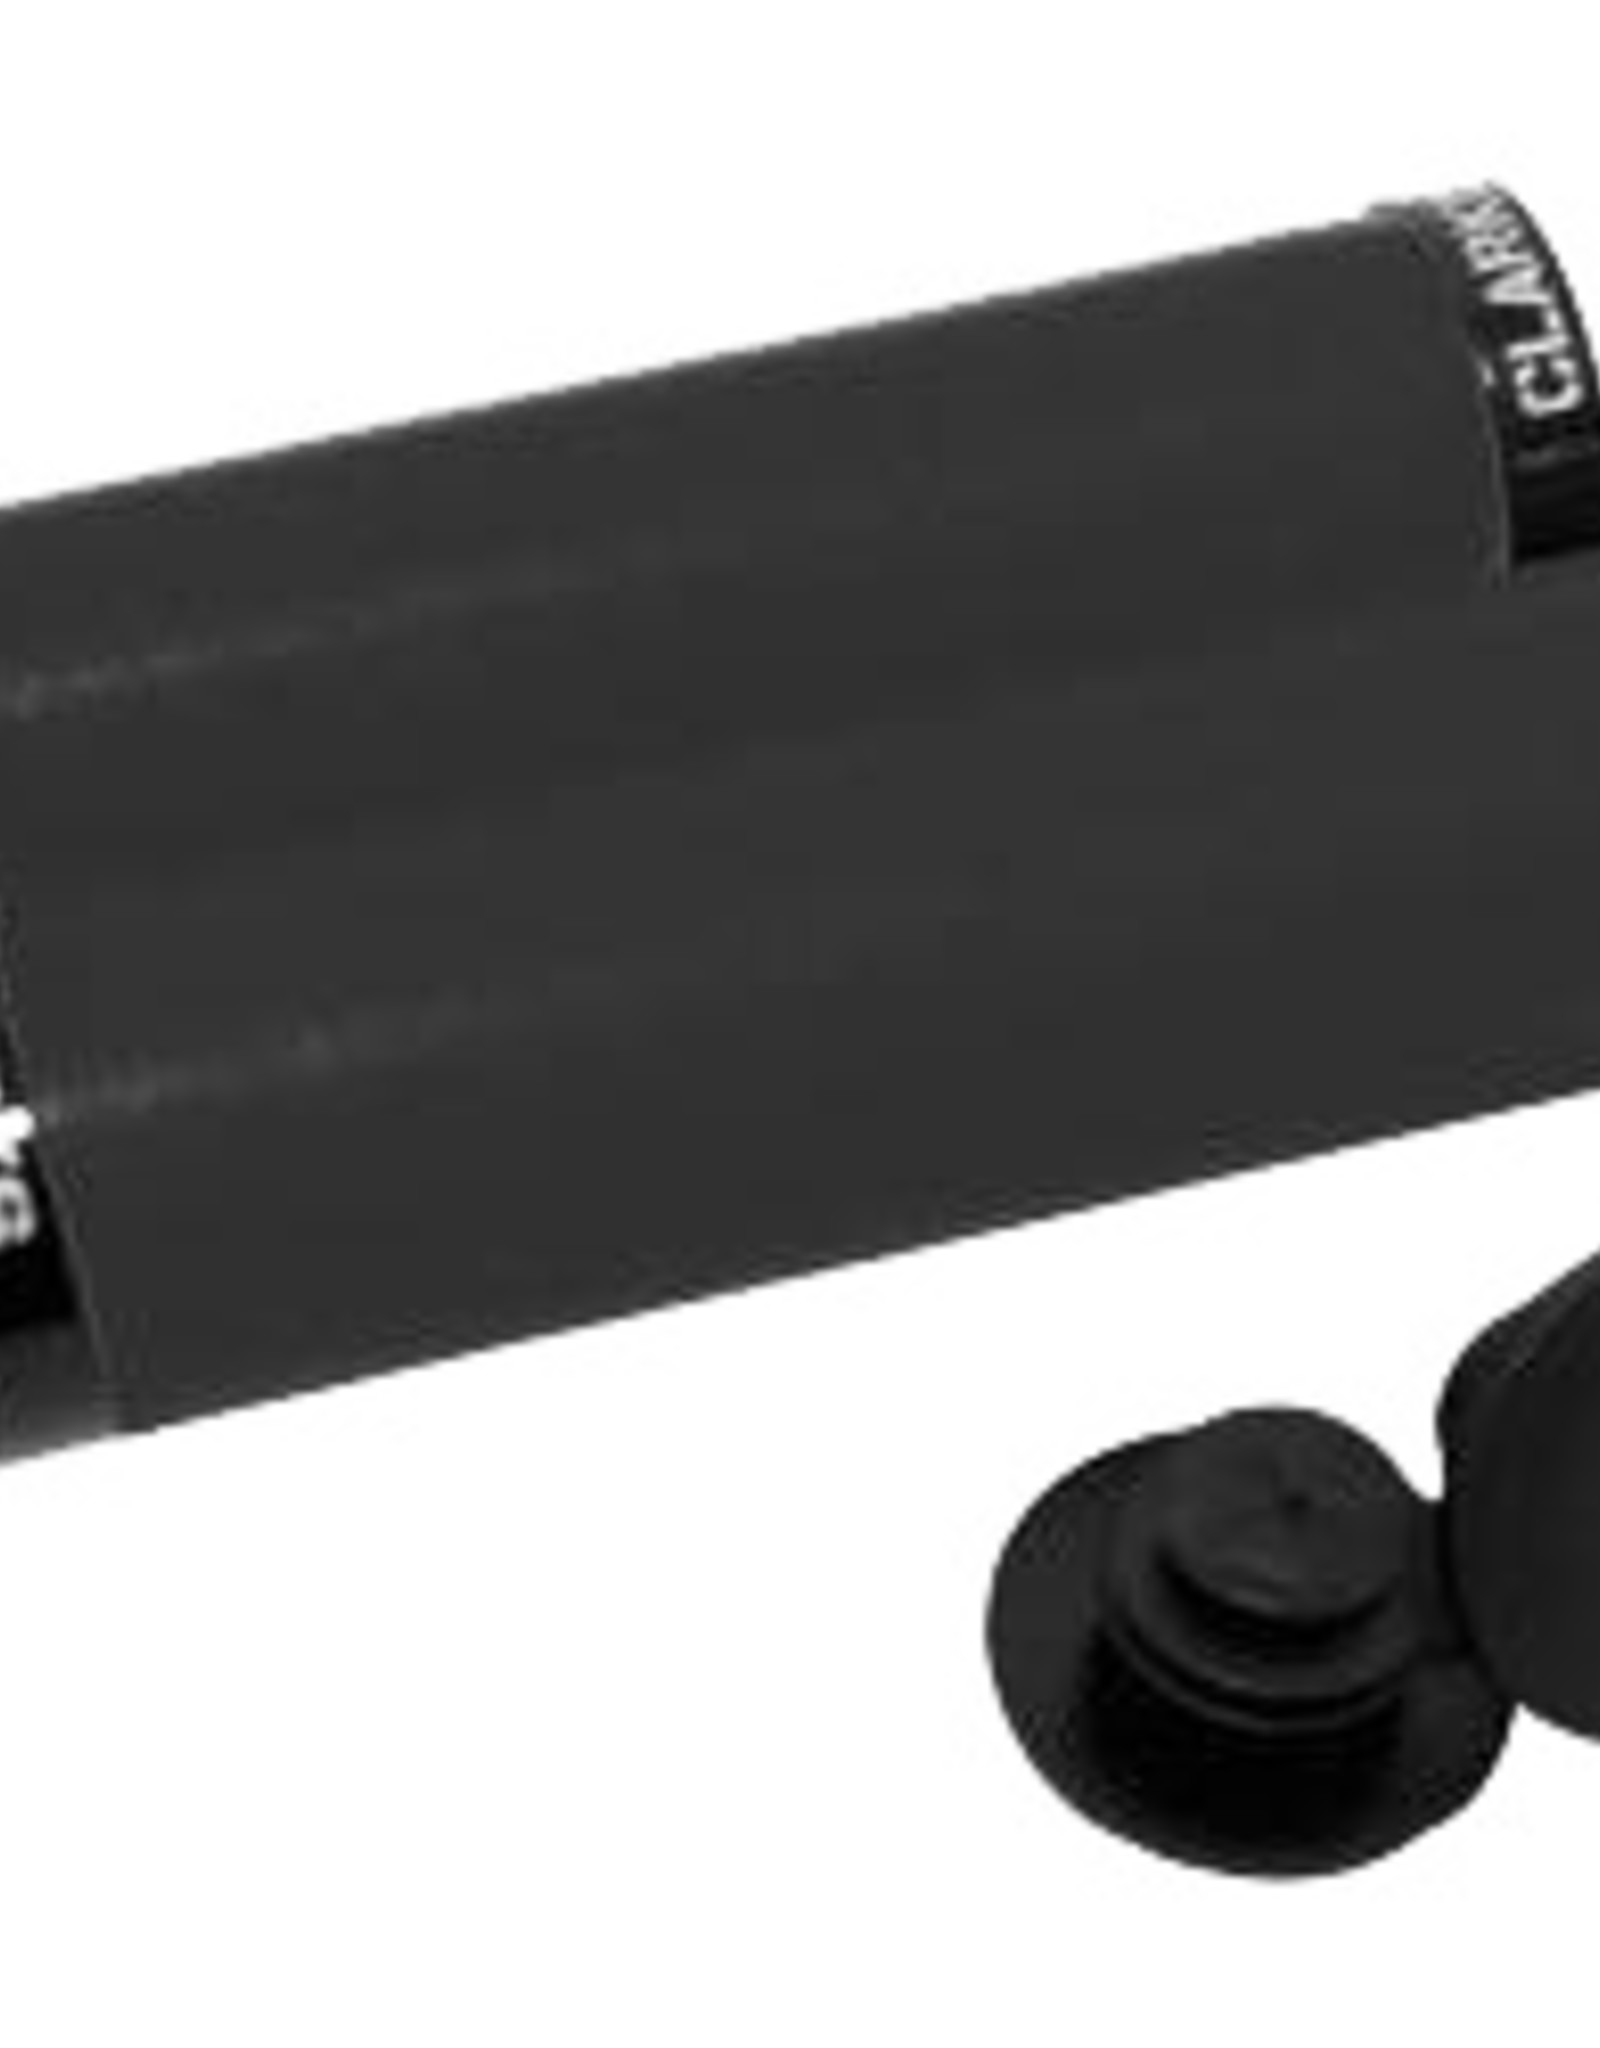 Clarks CS-001 Silicone Lock-on Grips in Black